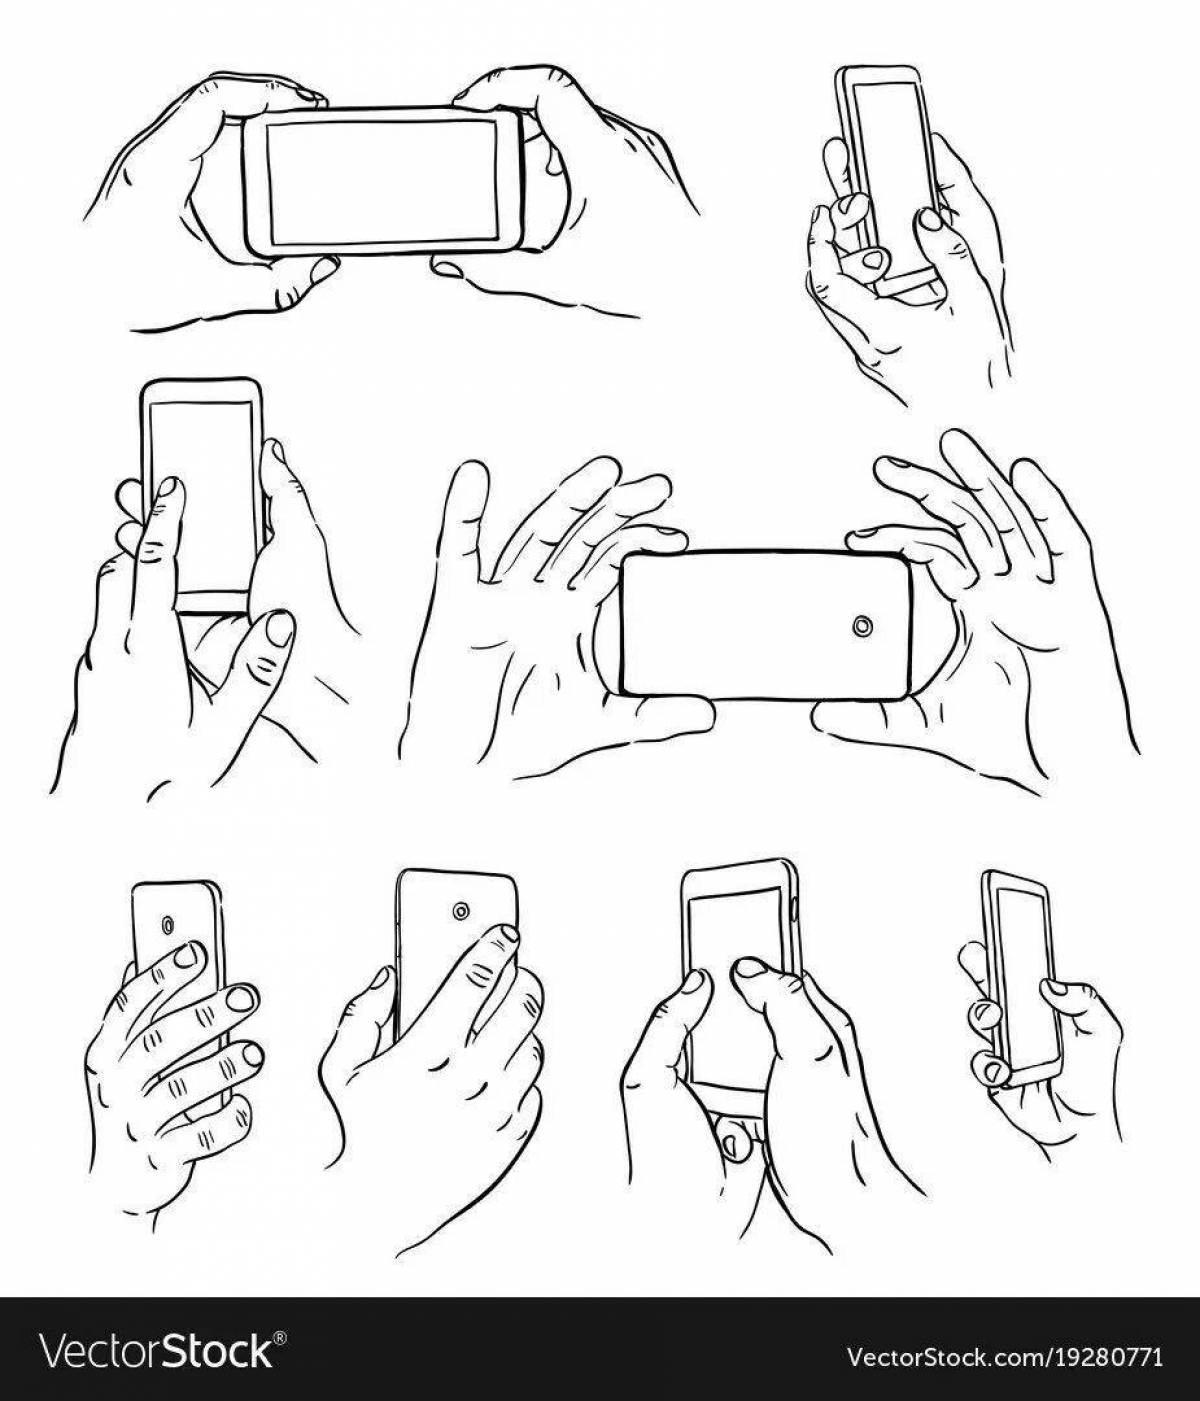 Coloring book glowing phone with finger